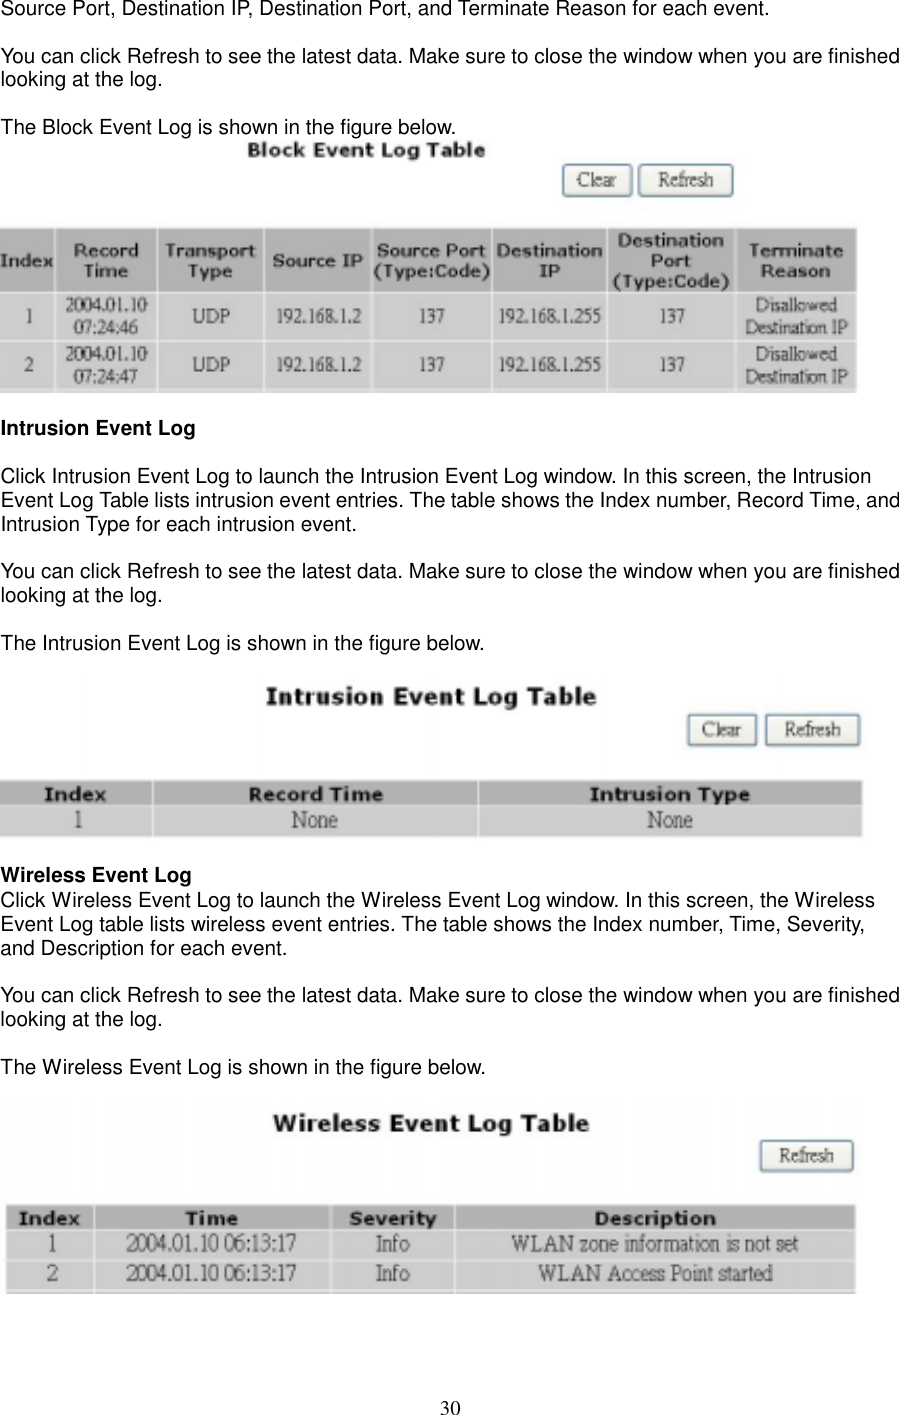  30Source Port, Destination IP, Destination Port, and Terminate Reason for each event.    You can click Refresh to see the latest data. Make sure to close the window when you are finished looking at the log.  The Block Event Log is shown in the figure below.   Intrusion Event Log  Click Intrusion Event Log to launch the Intrusion Event Log window. In this screen, the Intrusion Event Log Table lists intrusion event entries. The table shows the Index number, Record Time, and Intrusion Type for each intrusion event.    You can click Refresh to see the latest data. Make sure to close the window when you are finished looking at the log.  The Intrusion Event Log is shown in the figure below.    Wireless Event Log Click Wireless Event Log to launch the Wireless Event Log window. In this screen, the Wireless Event Log table lists wireless event entries. The table shows the Index number, Time, Severity, and Description for each event.  You can click Refresh to see the latest data. Make sure to close the window when you are finished looking at the log.  The Wireless Event Log is shown in the figure below.     